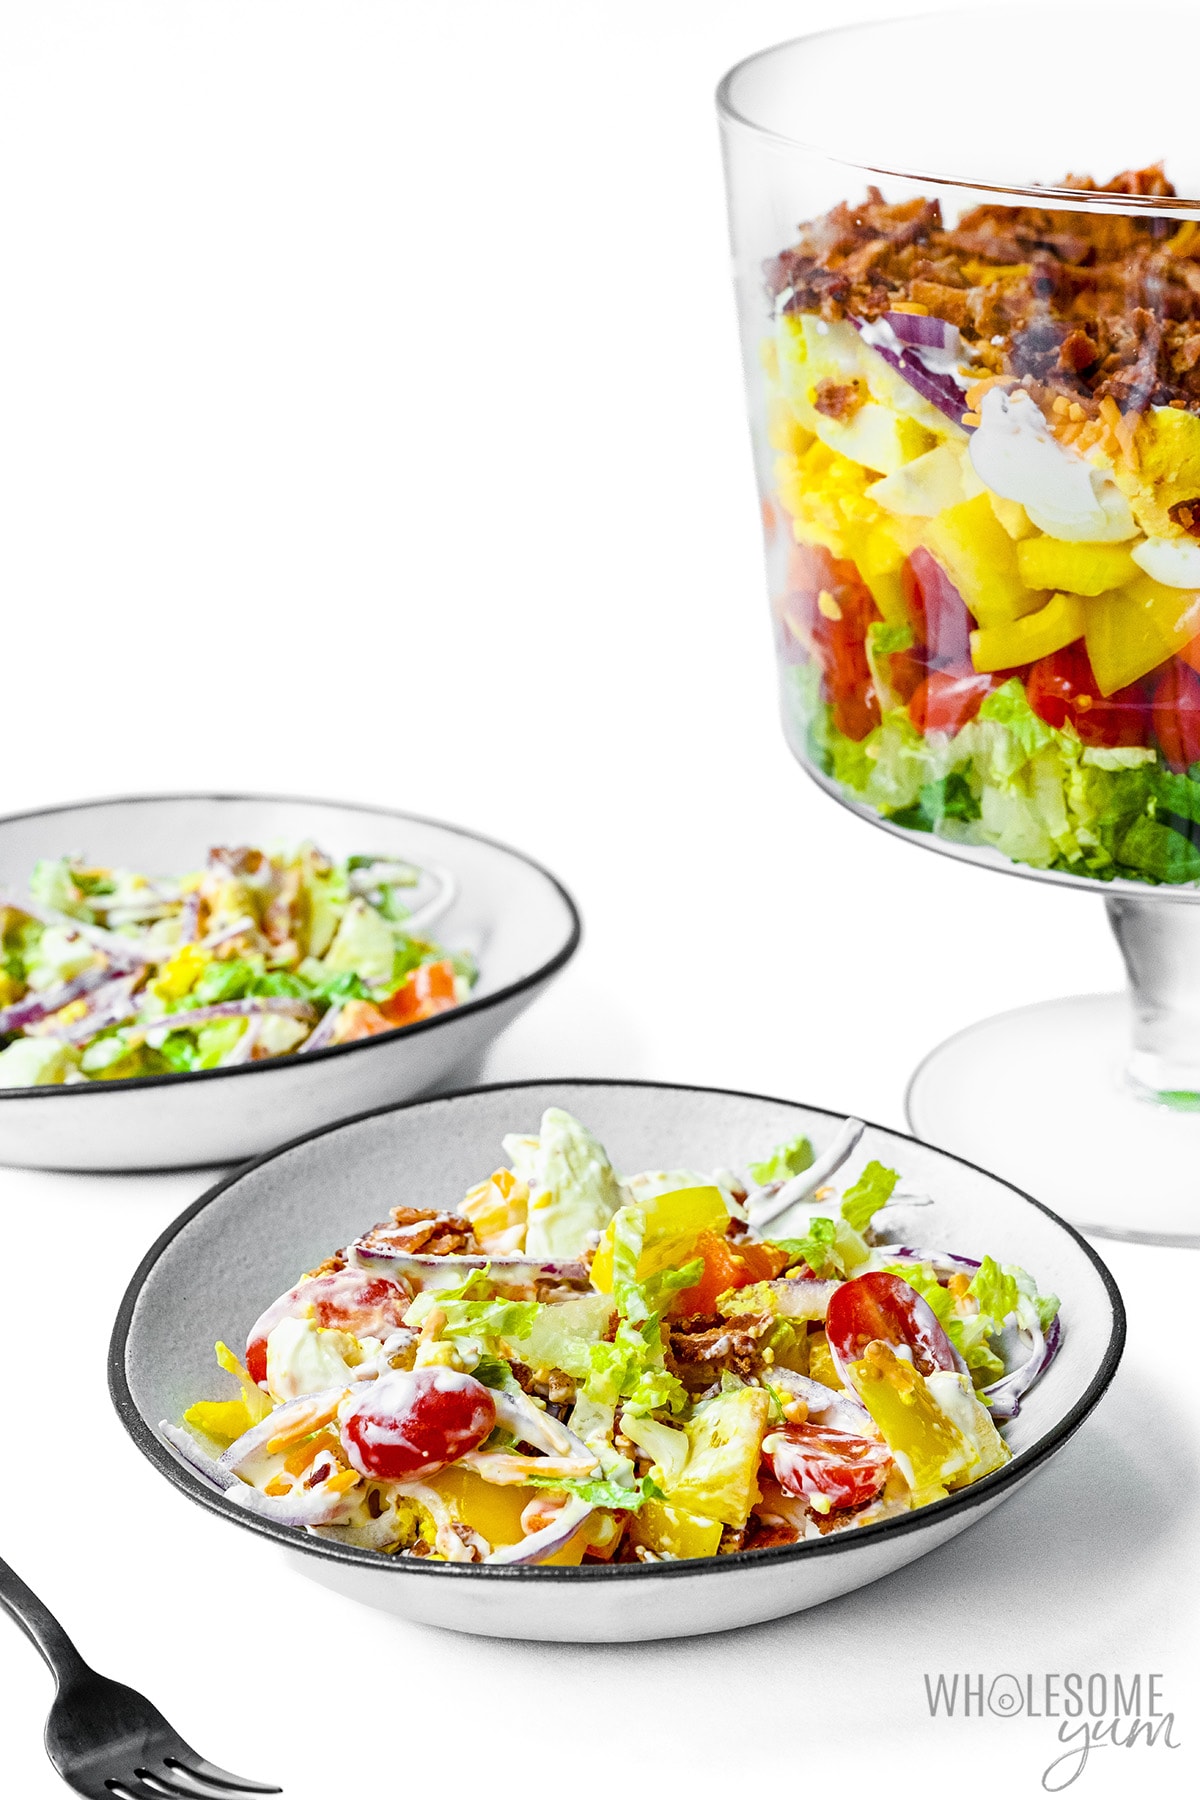 Seven-layer salad with large bowls in the background.